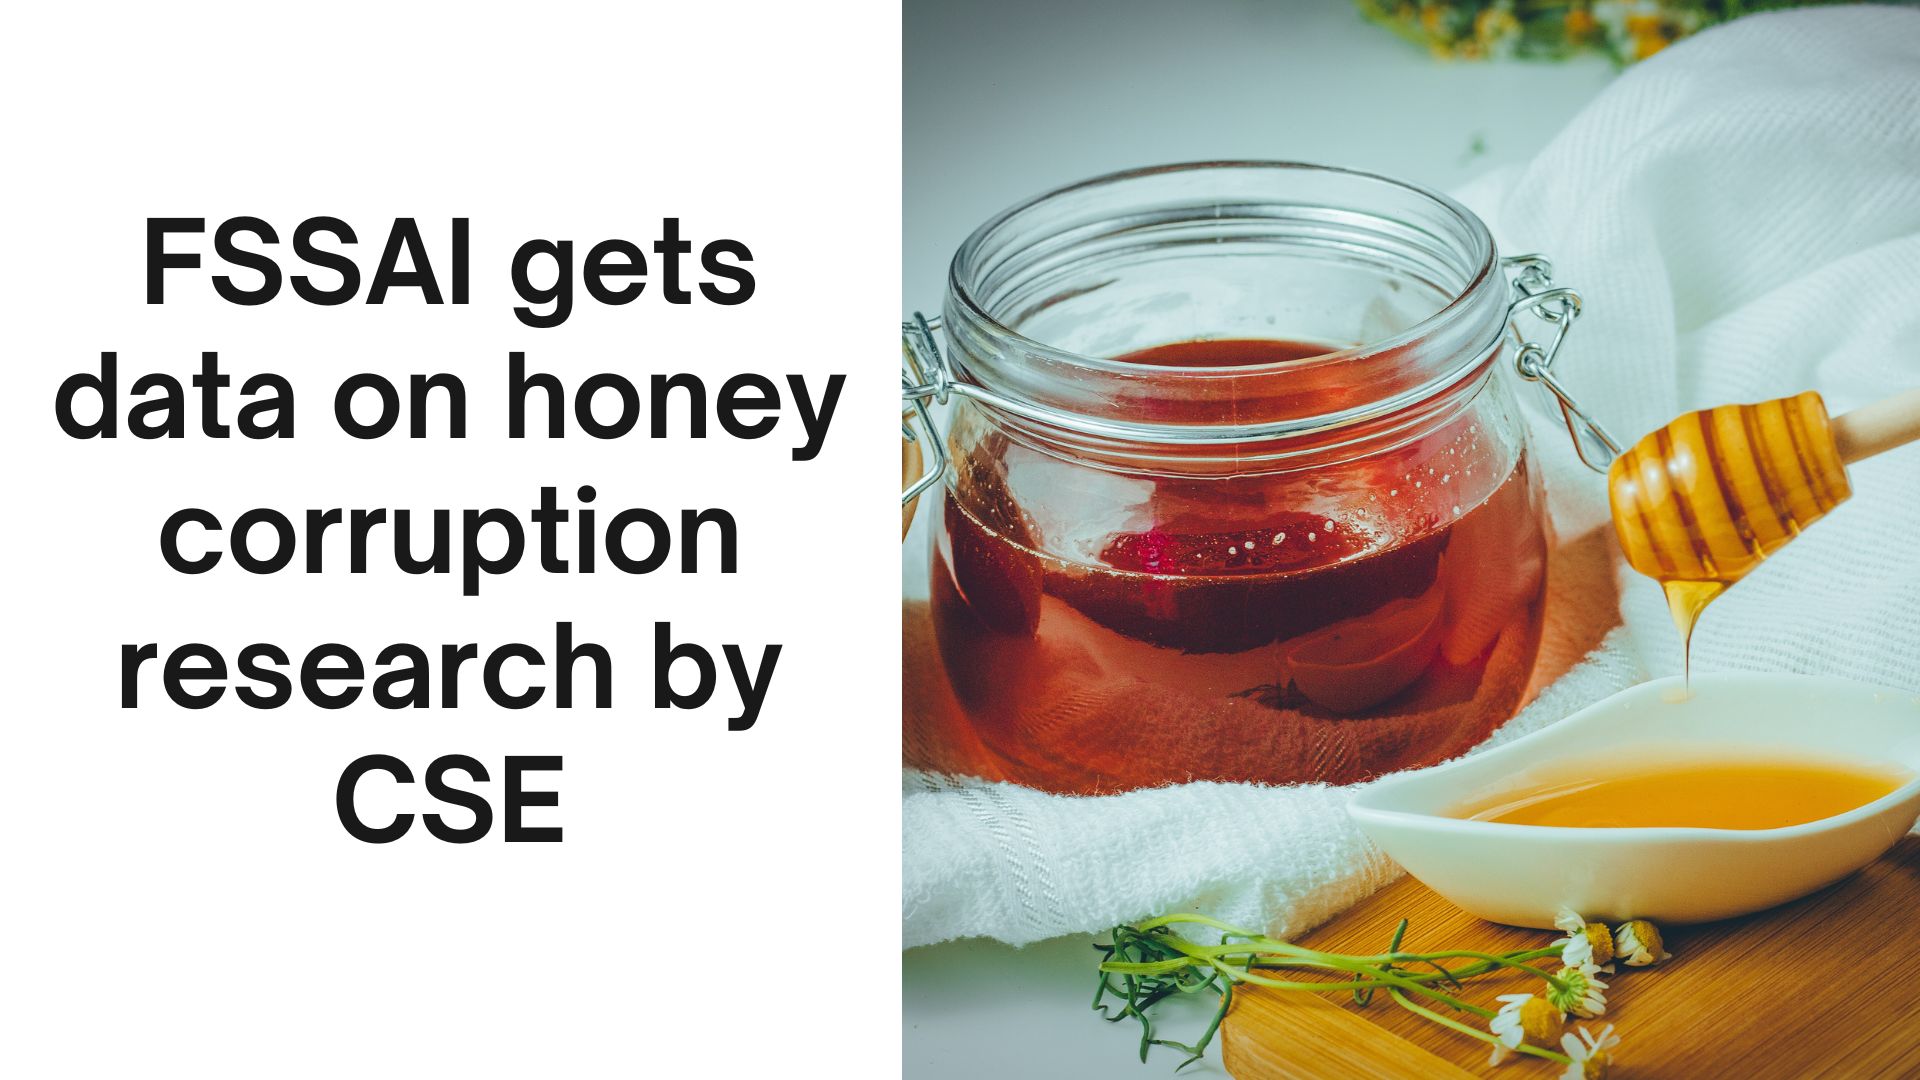 FSSAI gets data on honey corruption research by CSE